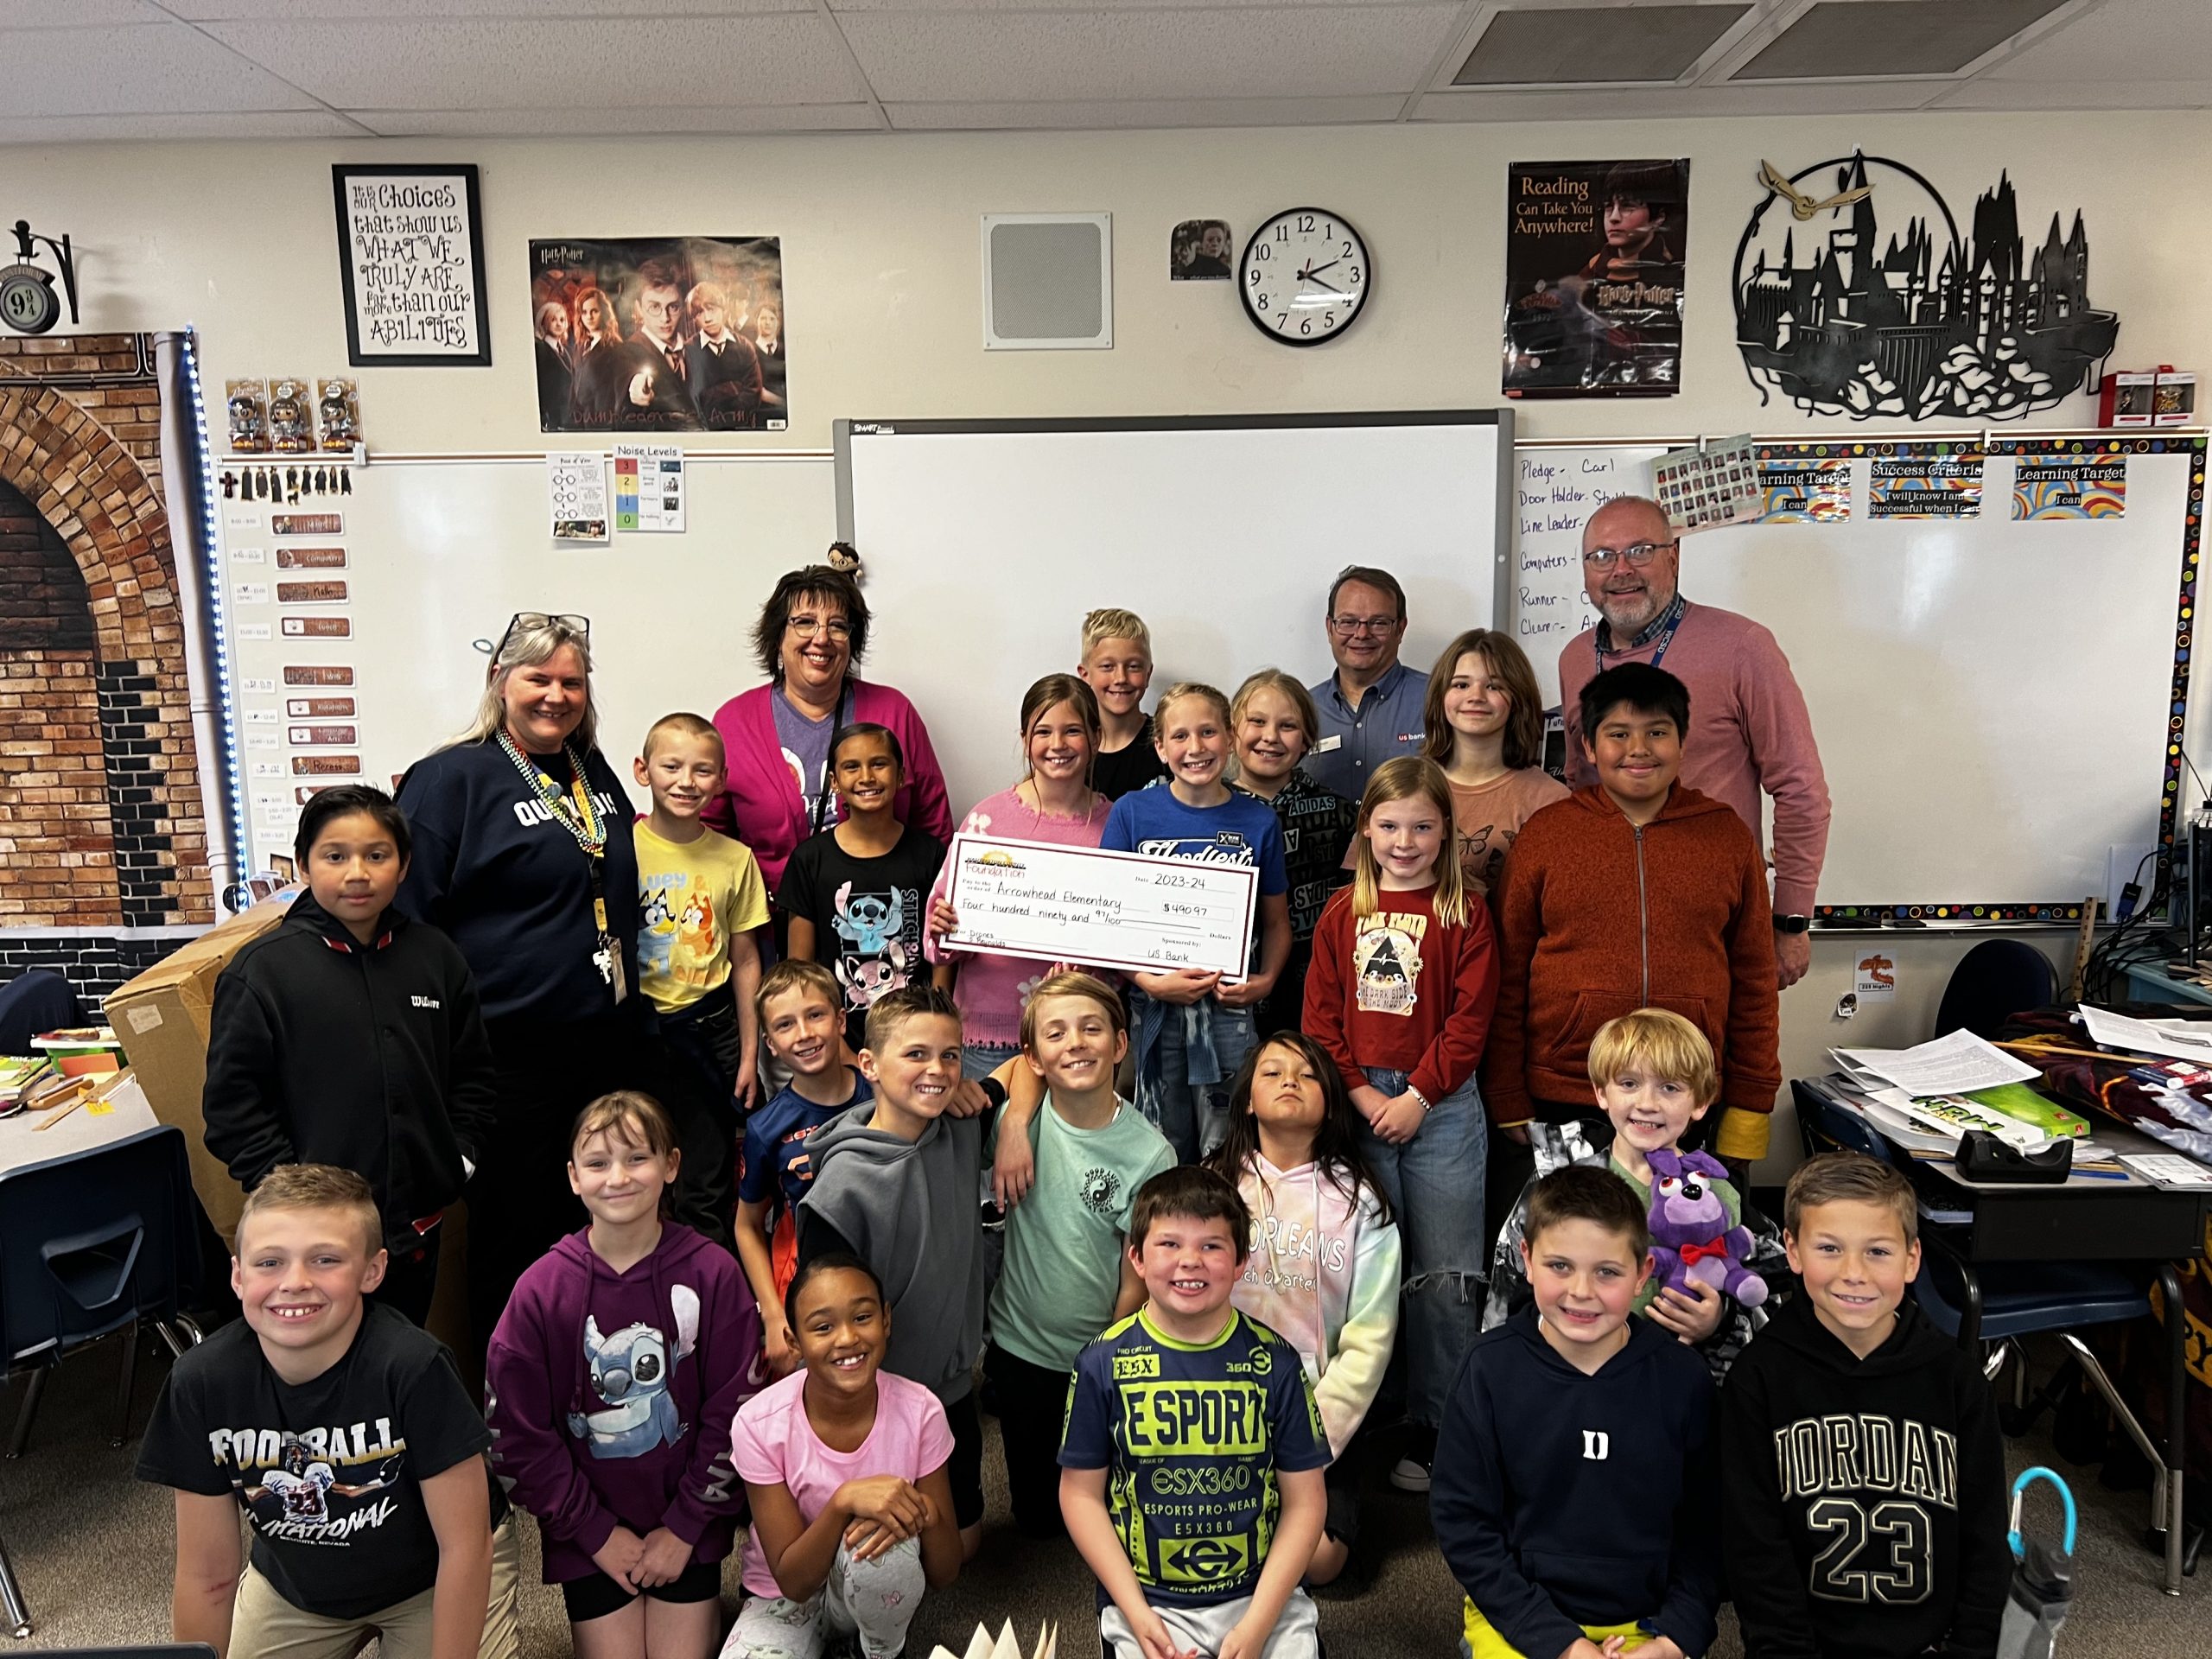 Ms. Reynolds and Mrs. Heki, in Mrs. Reyonlds' class, received a Foundation Grant for the 2023-24 school year. Thank you, US Bank for the drones.